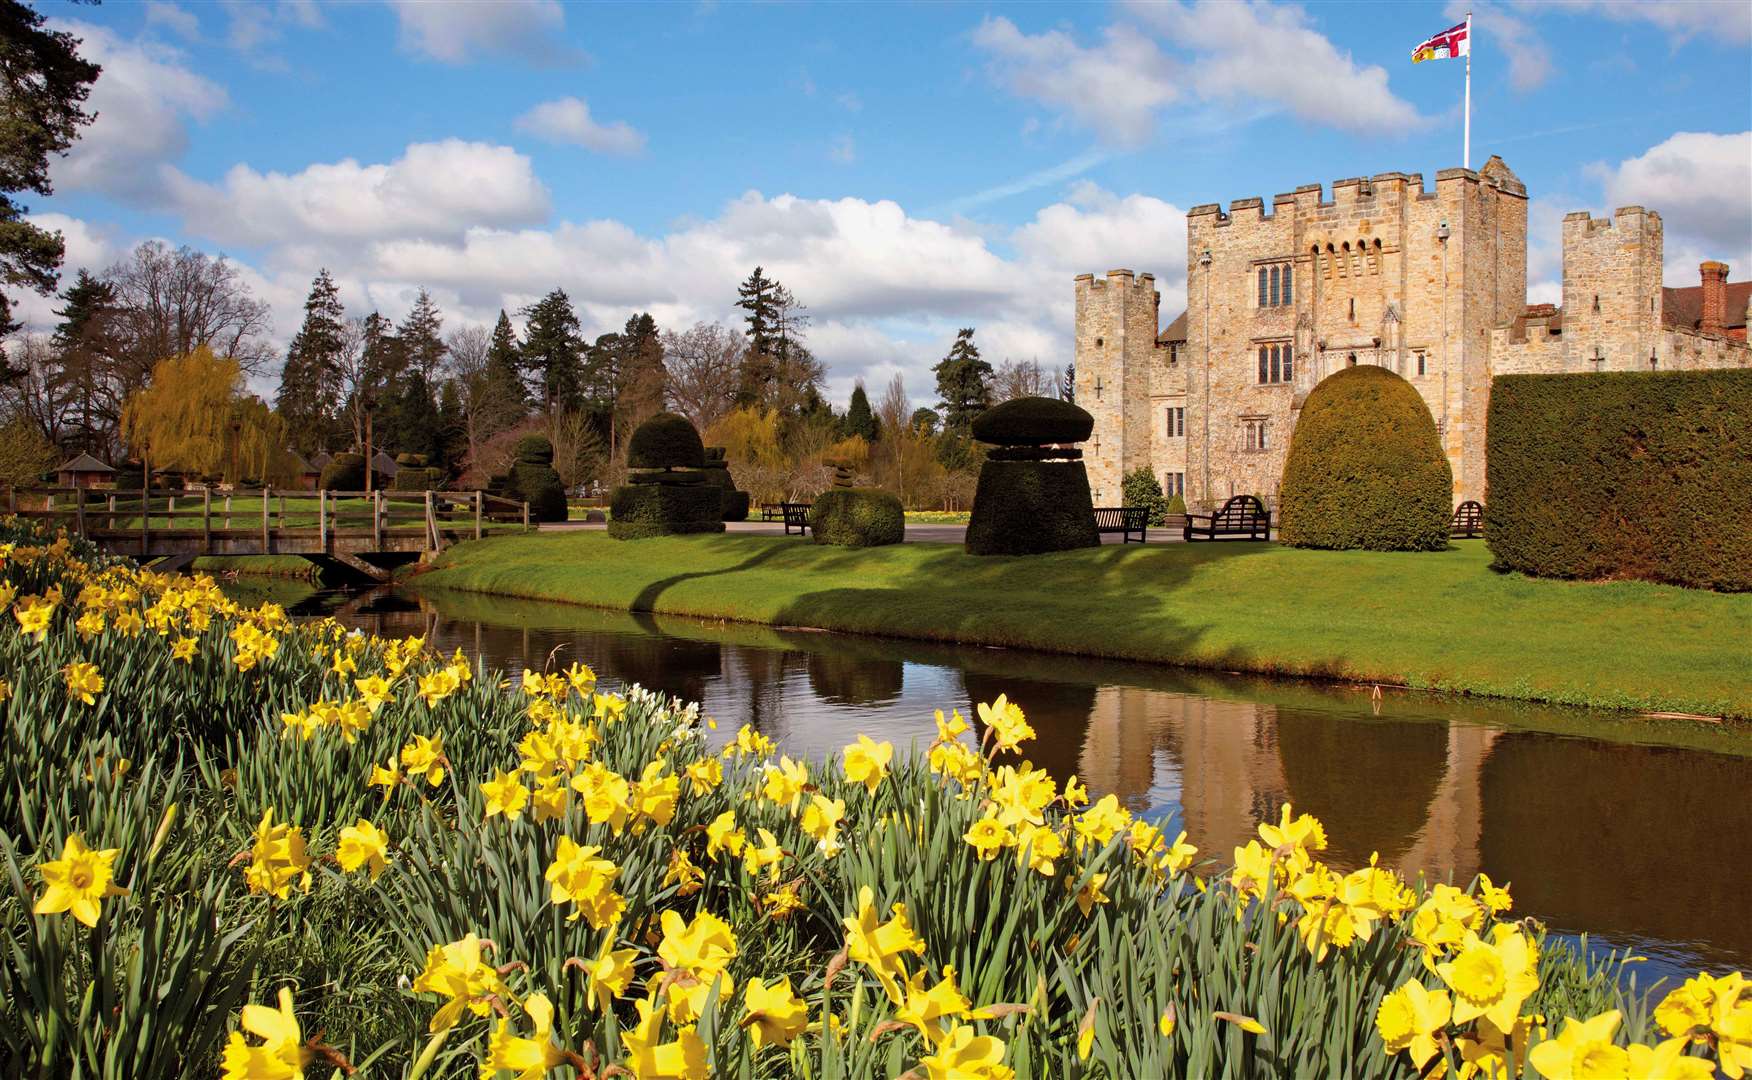 The annual Dazzling Daffodils display returns to Hever Castle this spring. Picture: Hever Castle and Gardens